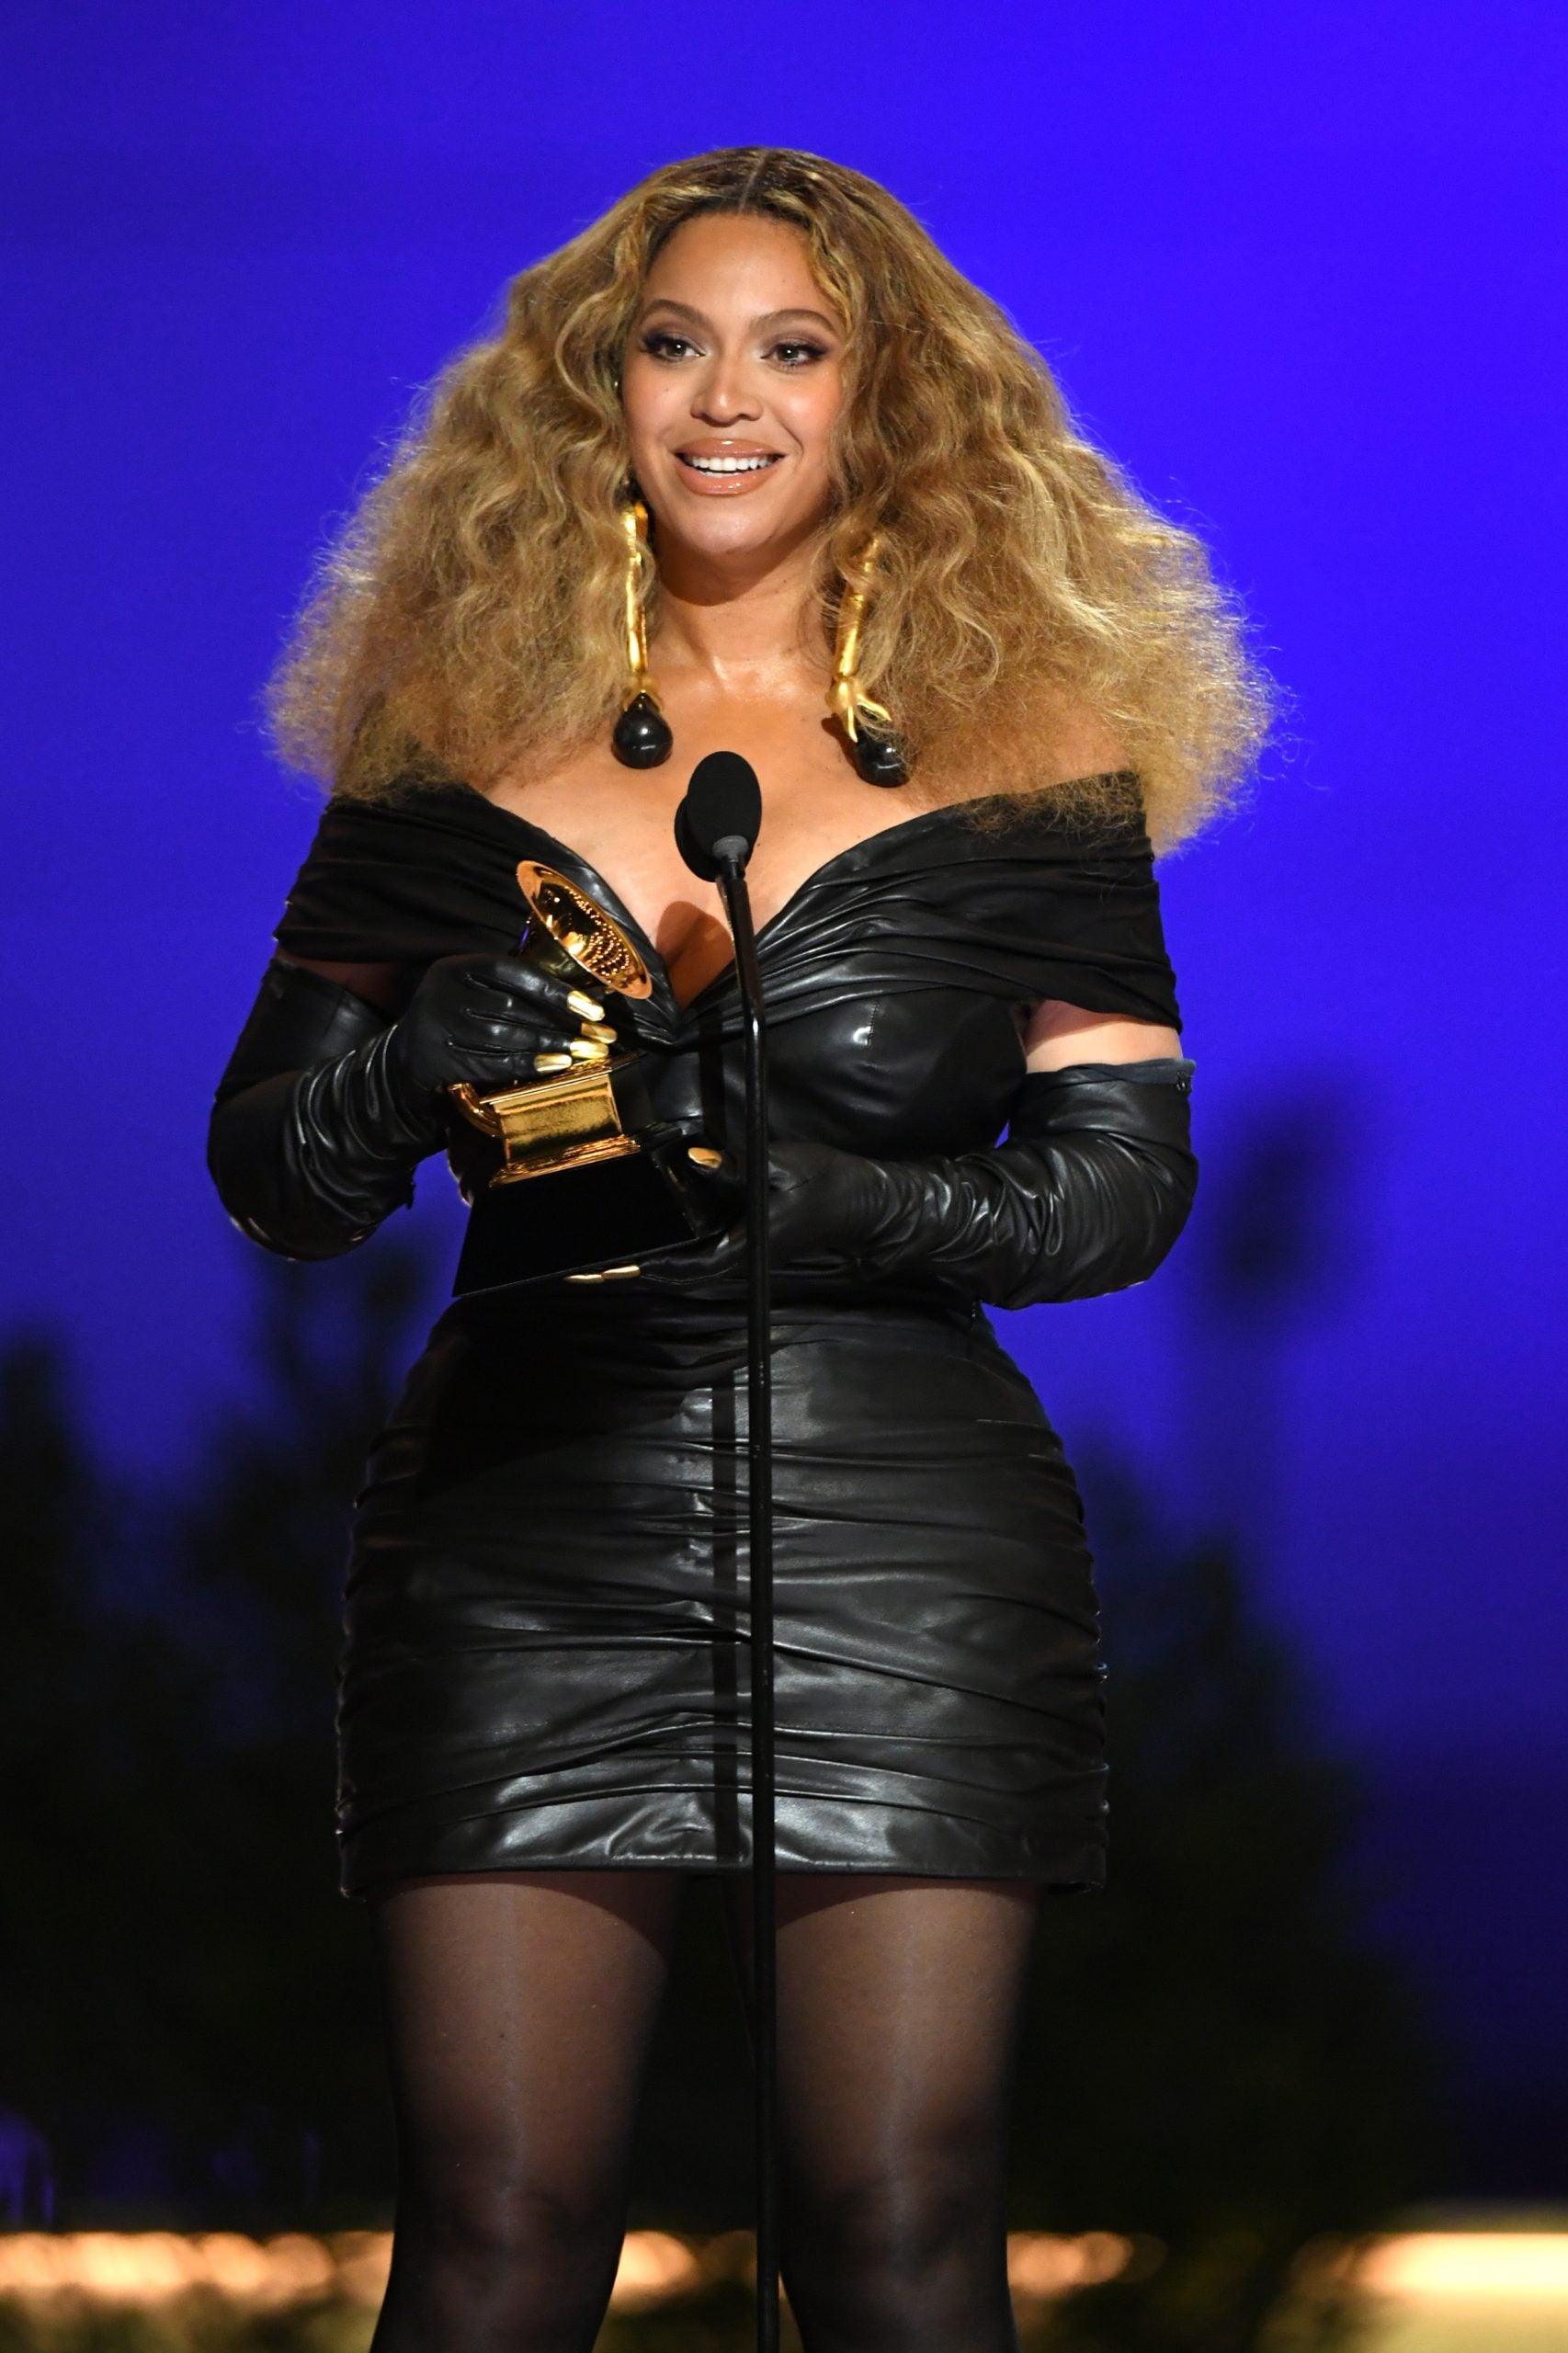 Beyoncé Has Now Won The Most Awards Of Any Female Artist In Grammy History